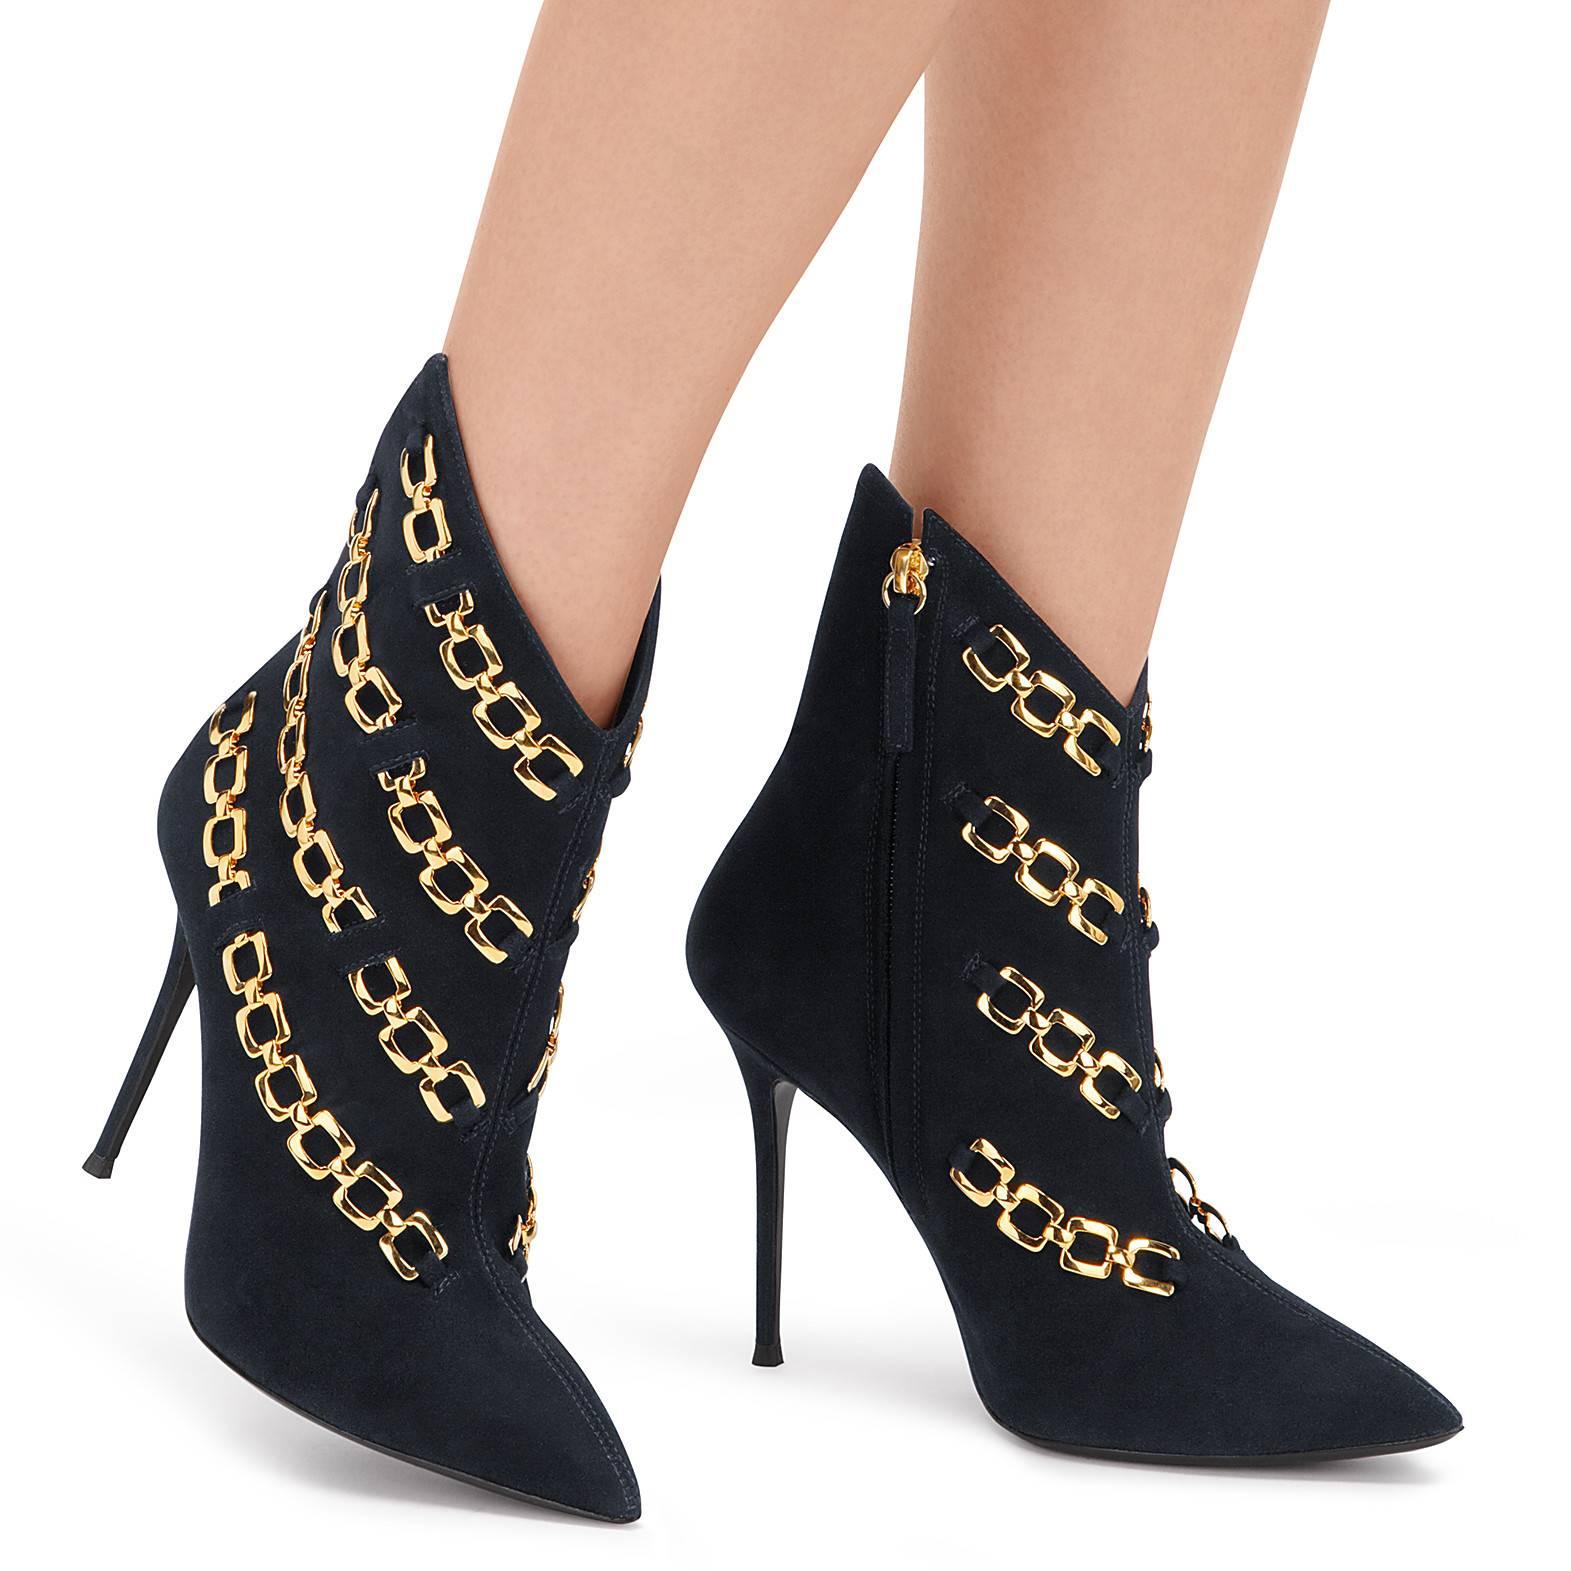 Giuseppe Zanotti New Sold Out Black Suede Gold Link Ankle Boots Booties in Box 

Size IT 36 - Need a different size?  Message us to help you find it.
Suede
Metal
Gold tone hardware
Slip on
Made in Italy
Heel height 4.1"
Includes original